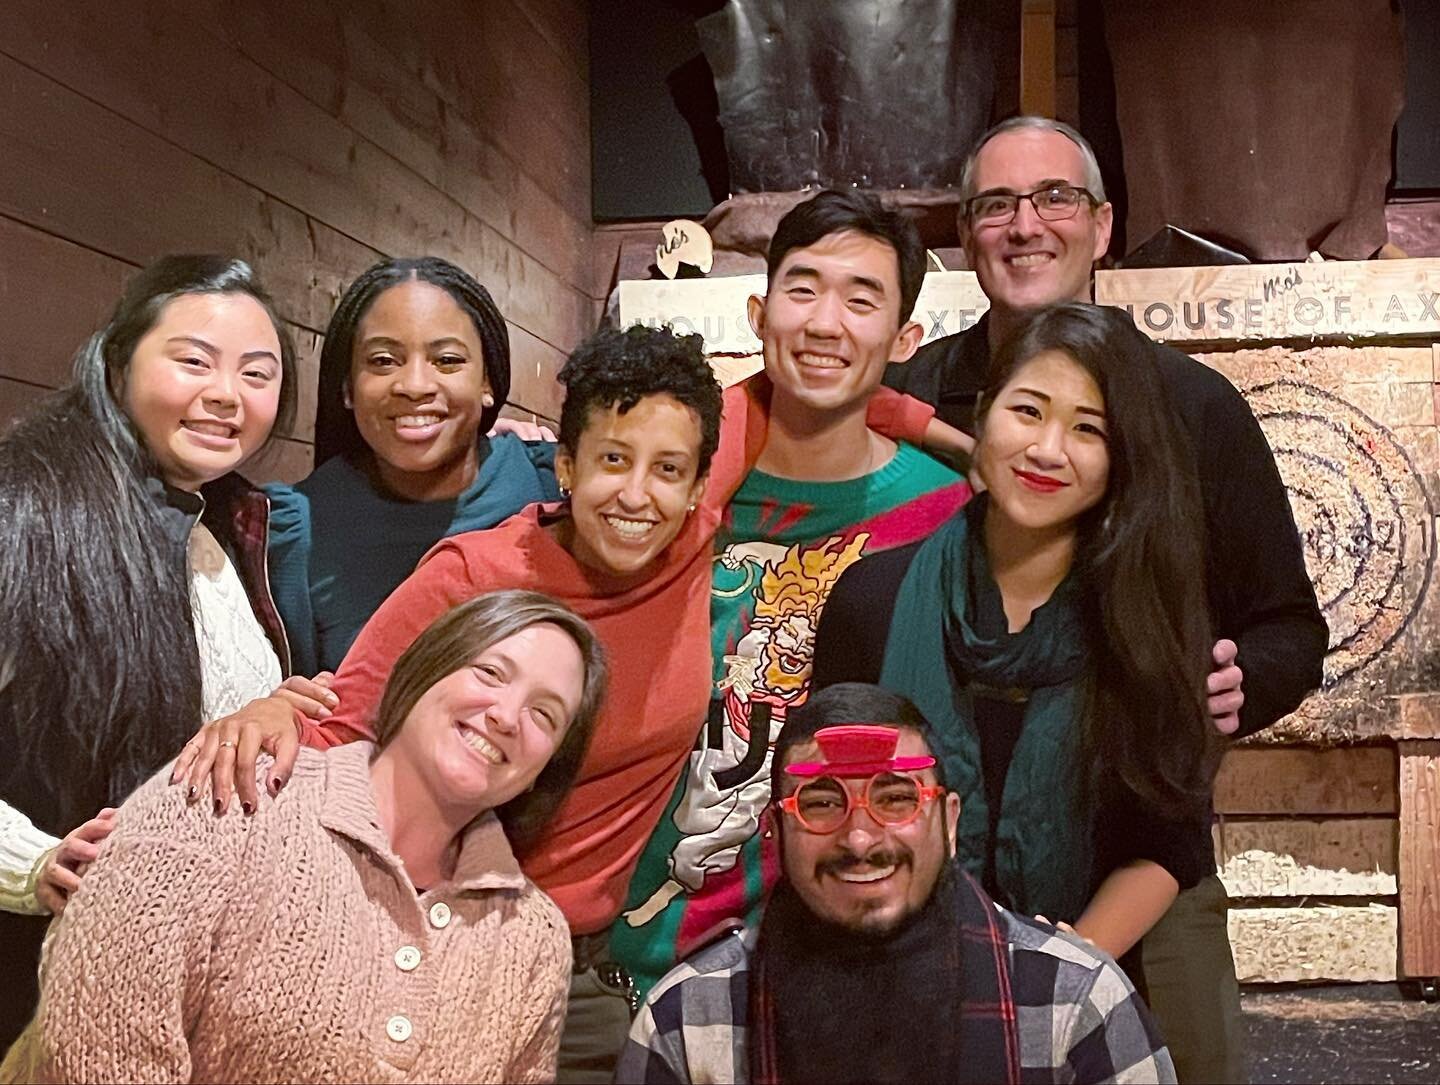 Happy Holidays from LAC+USC Med+Peds! 🎅🏼🎄🎁 One of the perks of being Med+Peds is being invited to 2 holiday parties! This year, the IM department hosted their annual holiday party at Mo&rsquo;s House of Axe - for first-time axe throwers, we did p